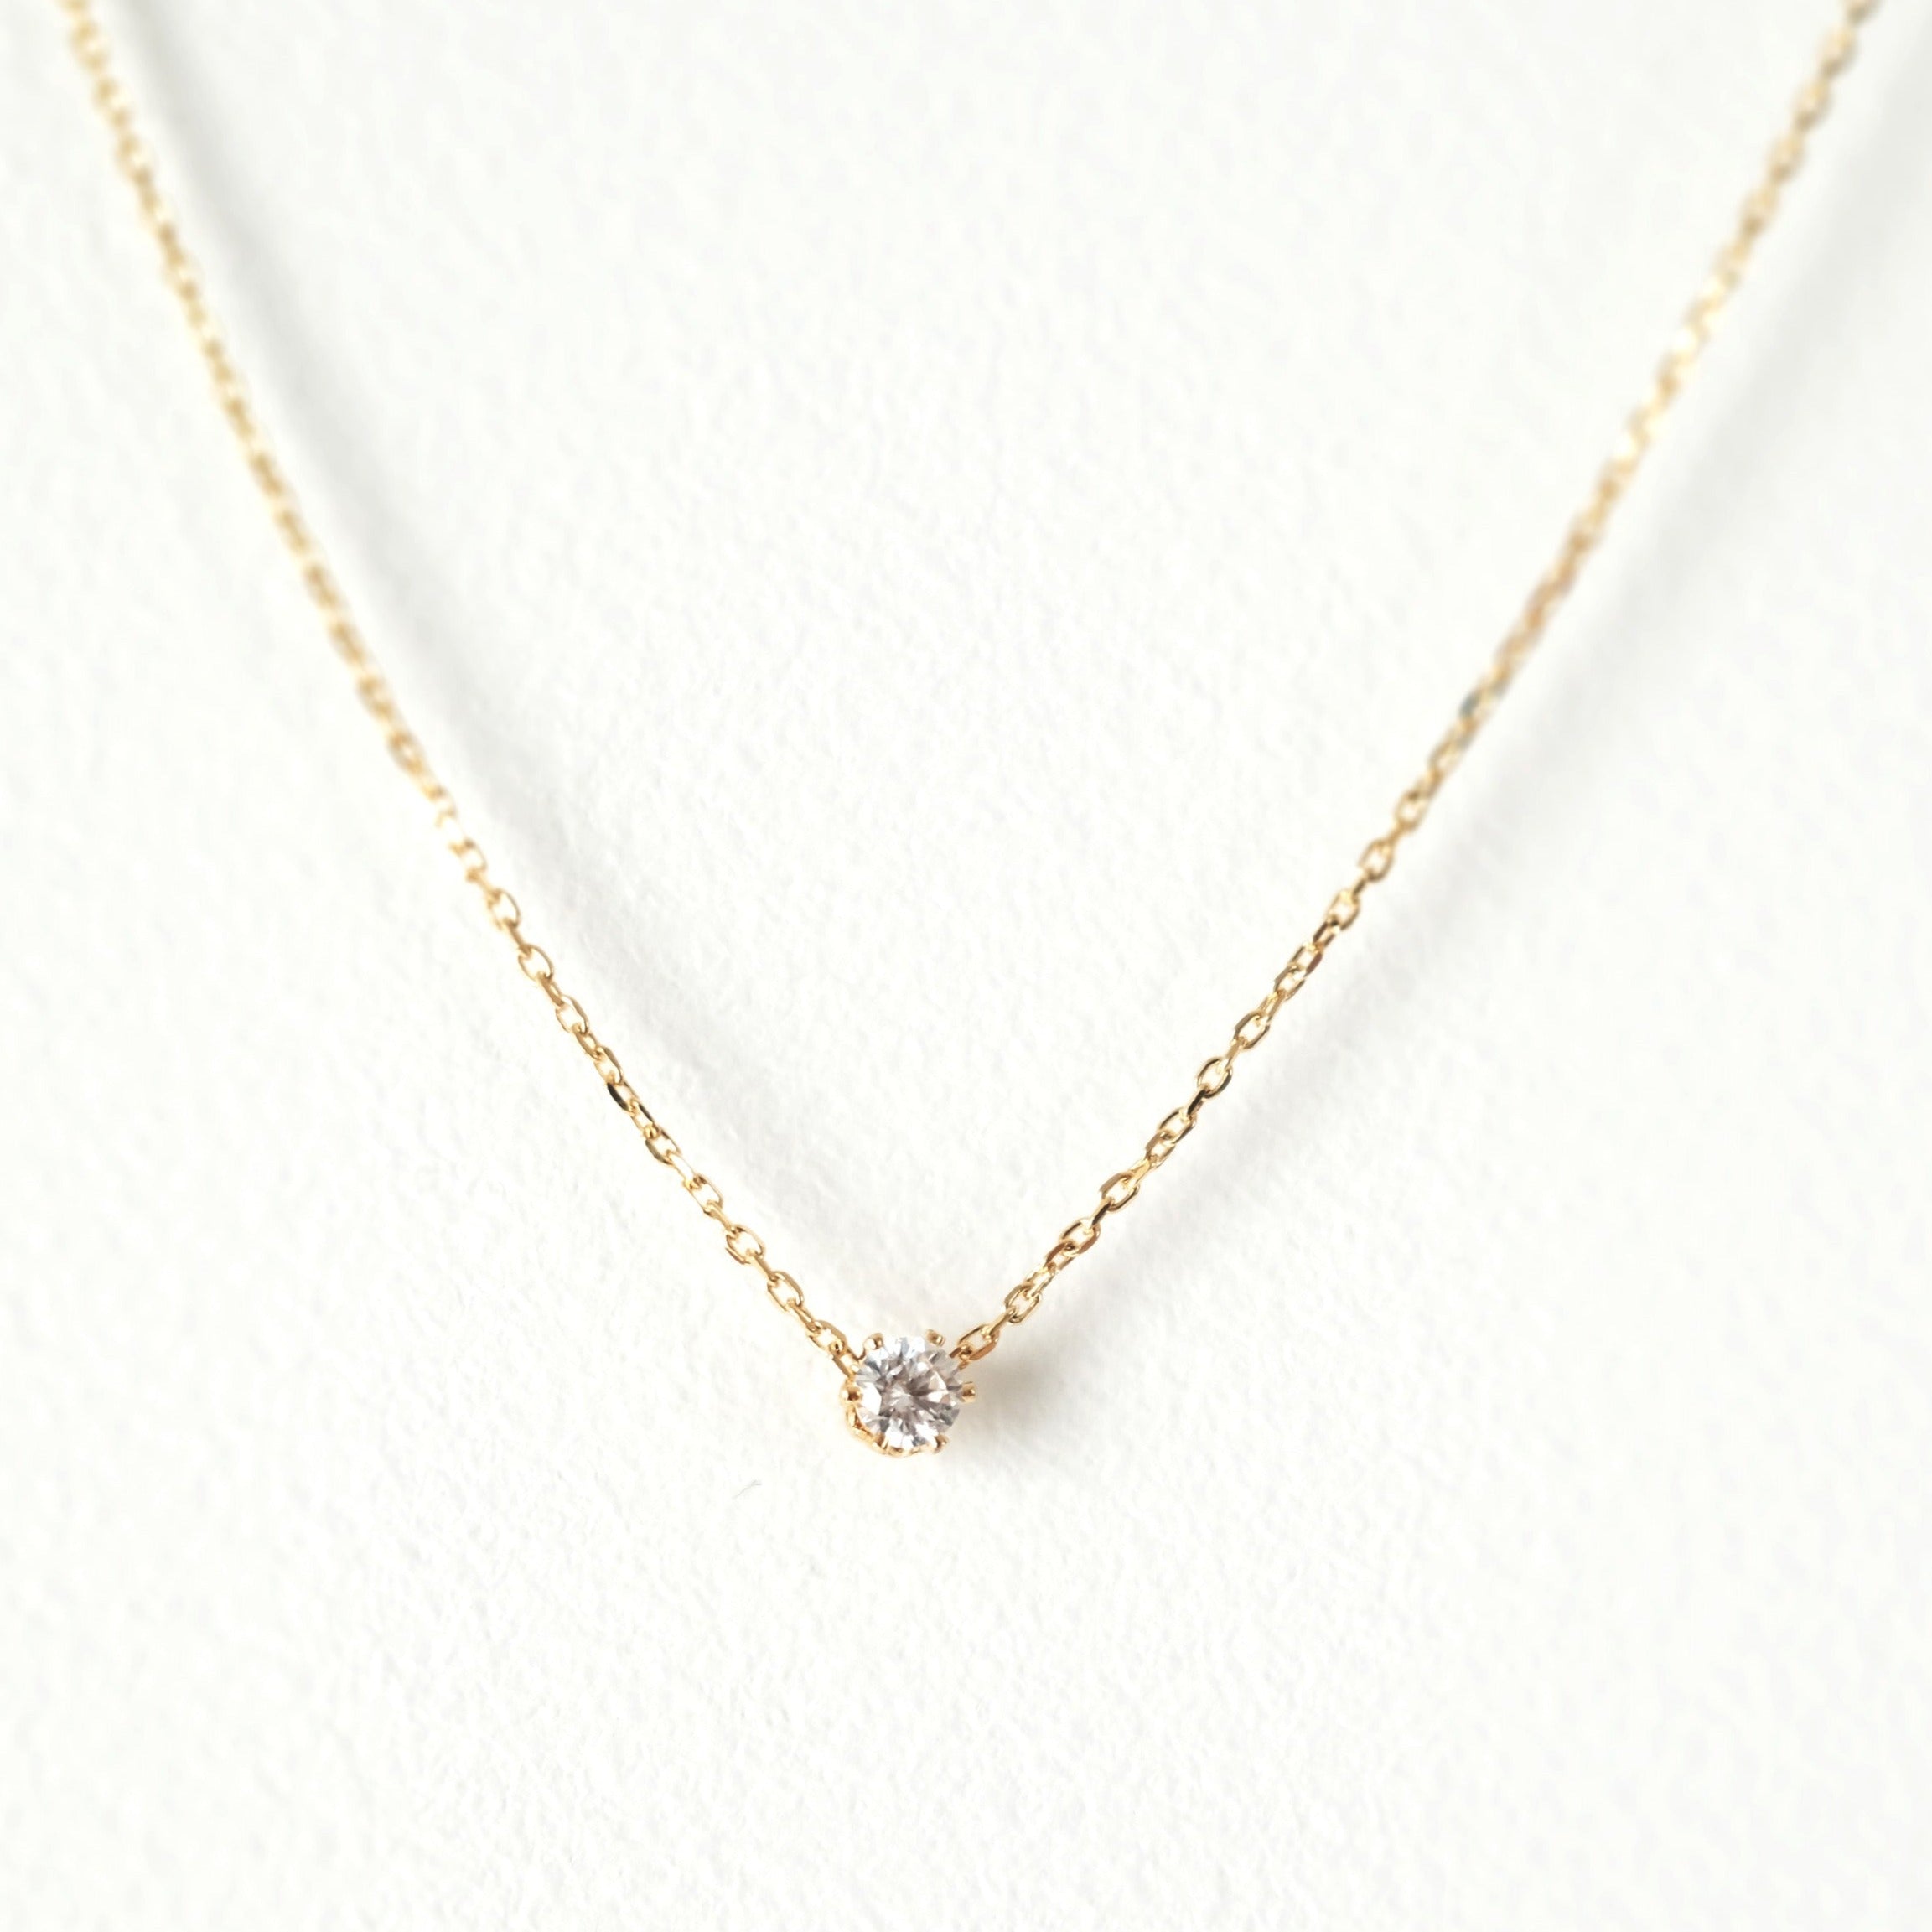 Petite Clear Crystal Necklace 2mm